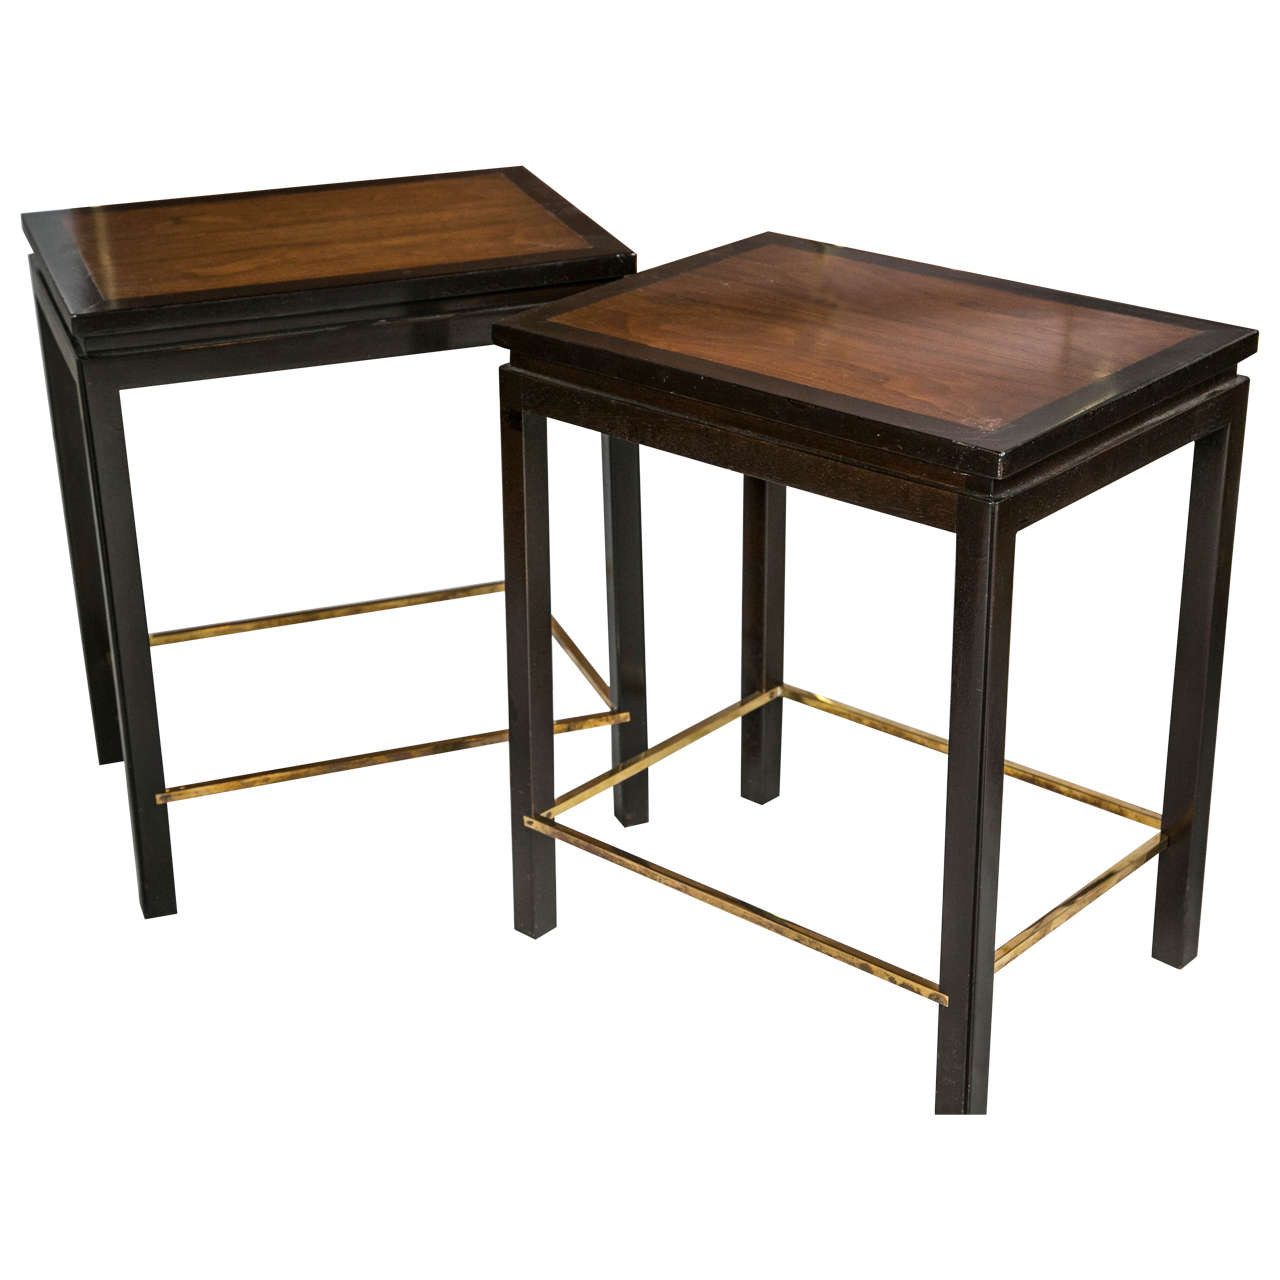 Pair of Small Tables by Dunbar For Sale